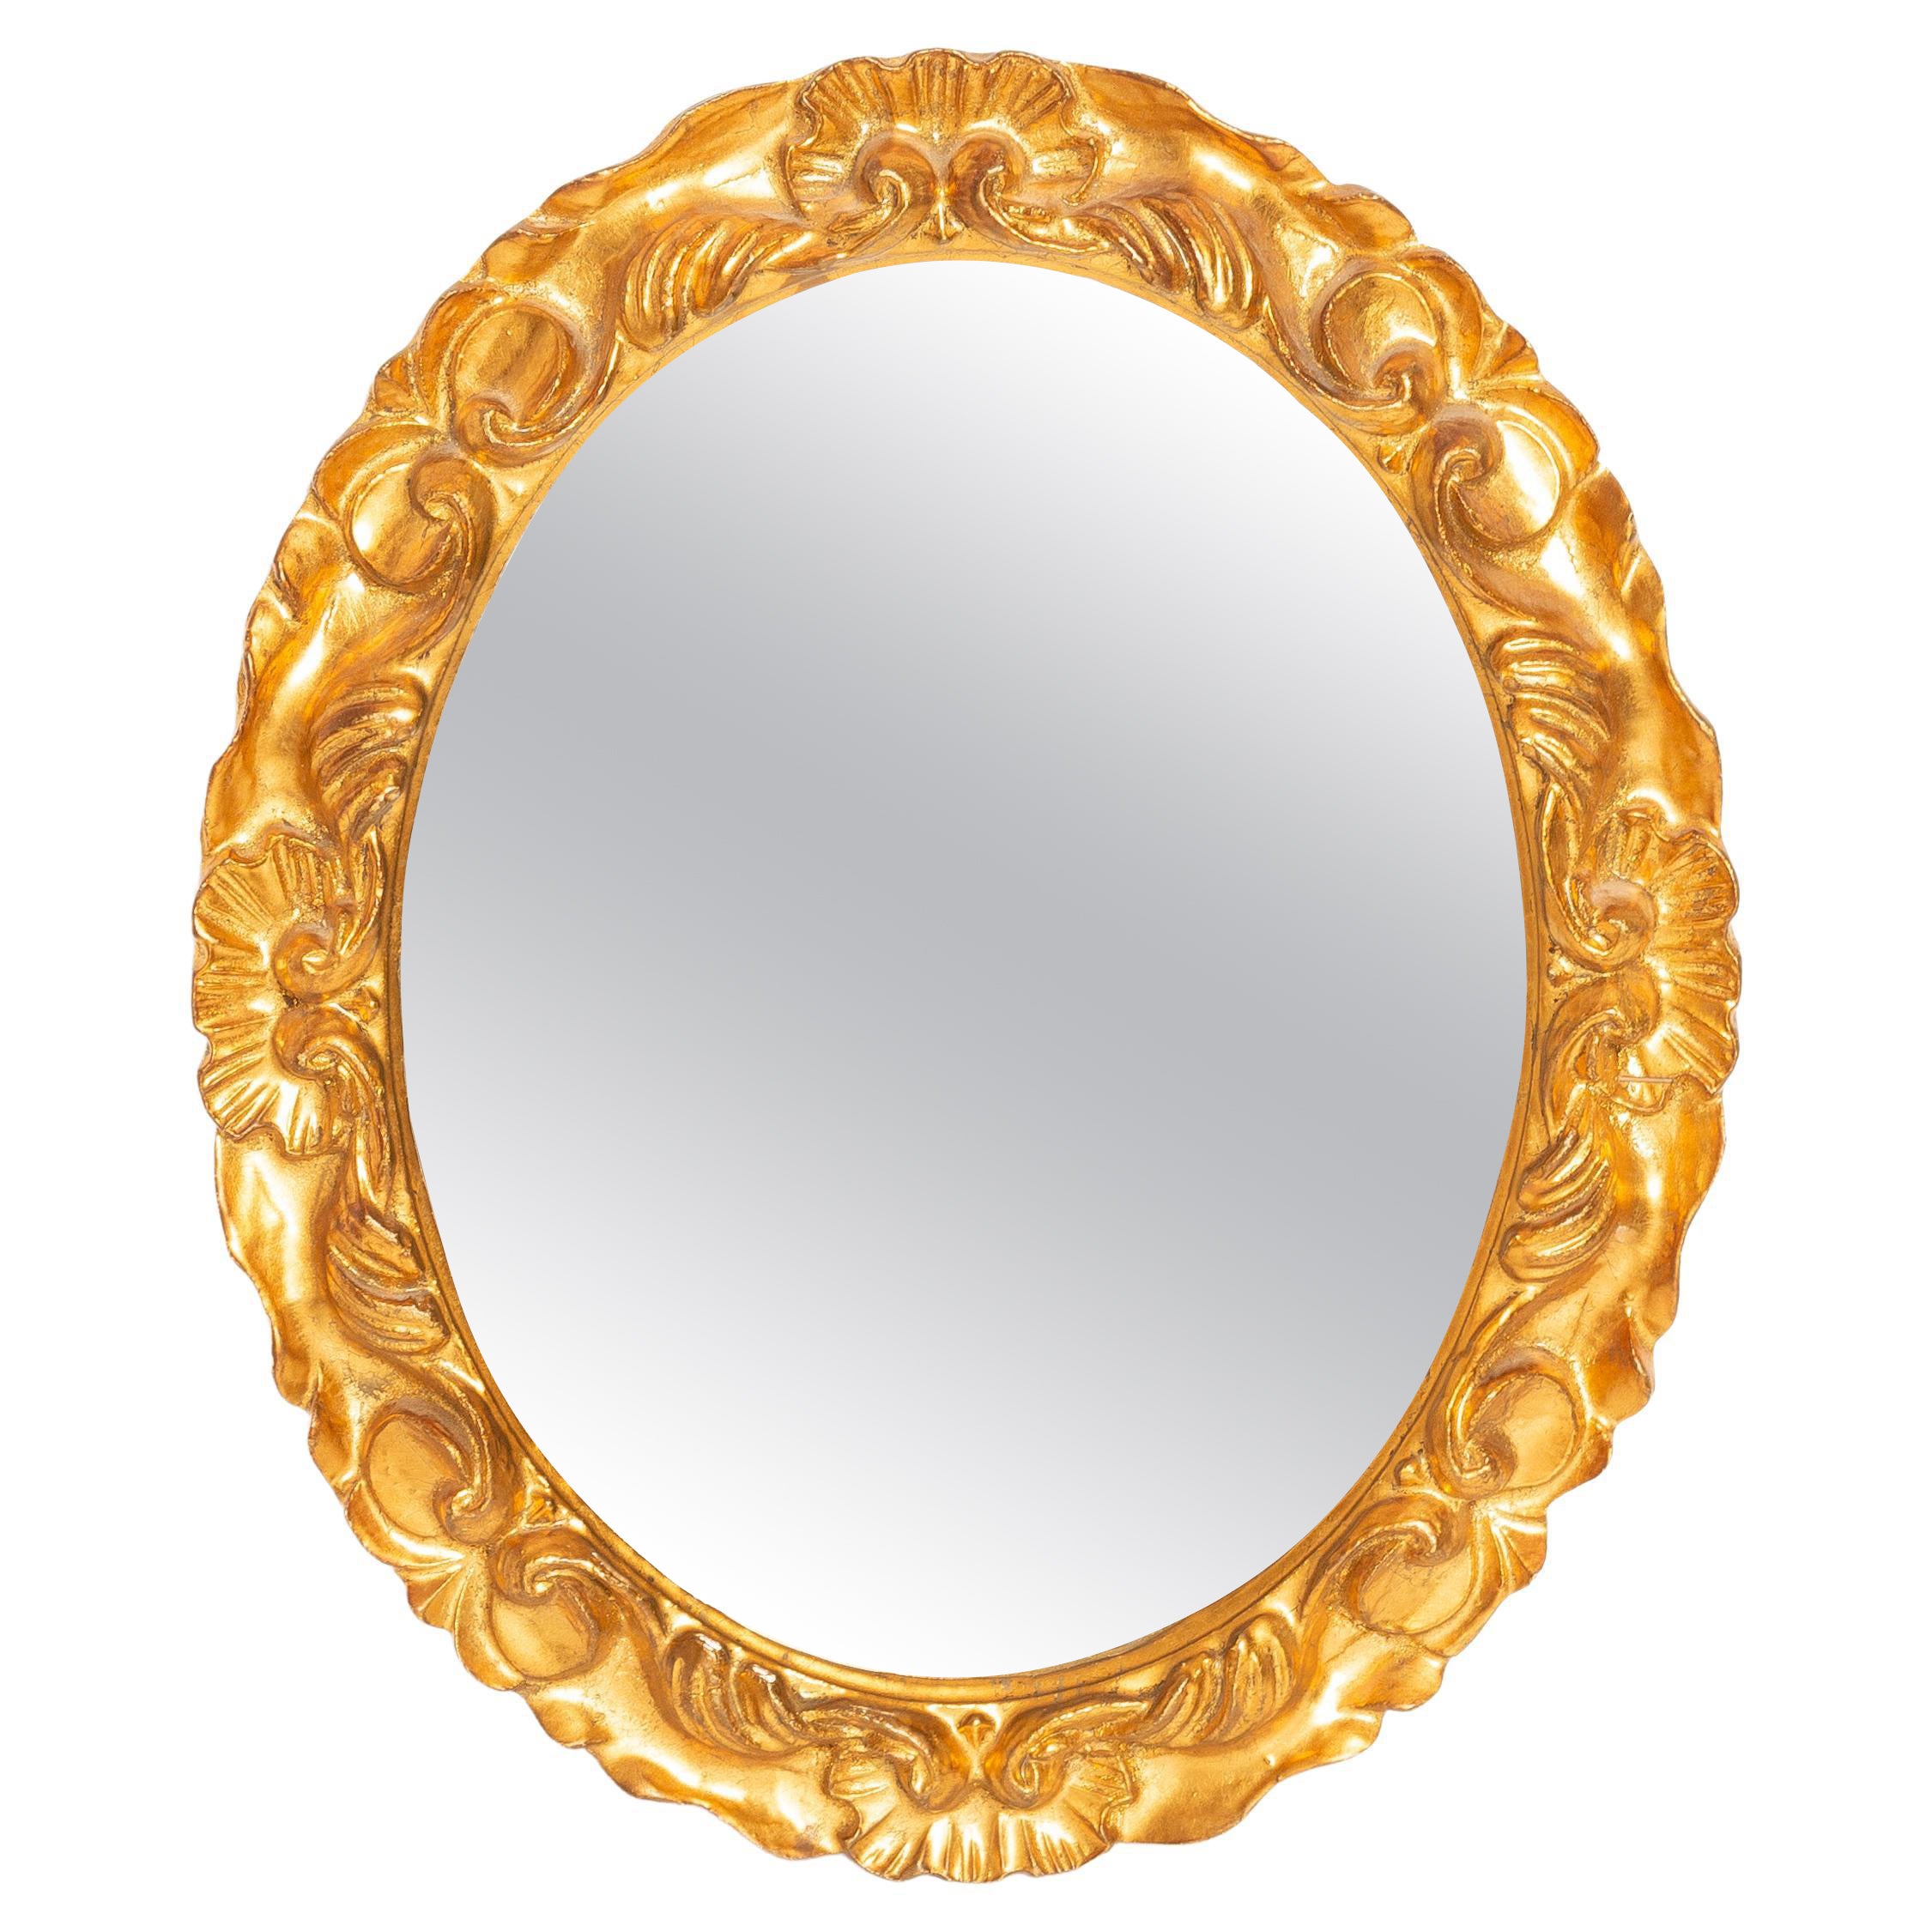 Vintage Small Oval Gold Decorative Wood Mirror in Flowers Frame, Italy, 1960s